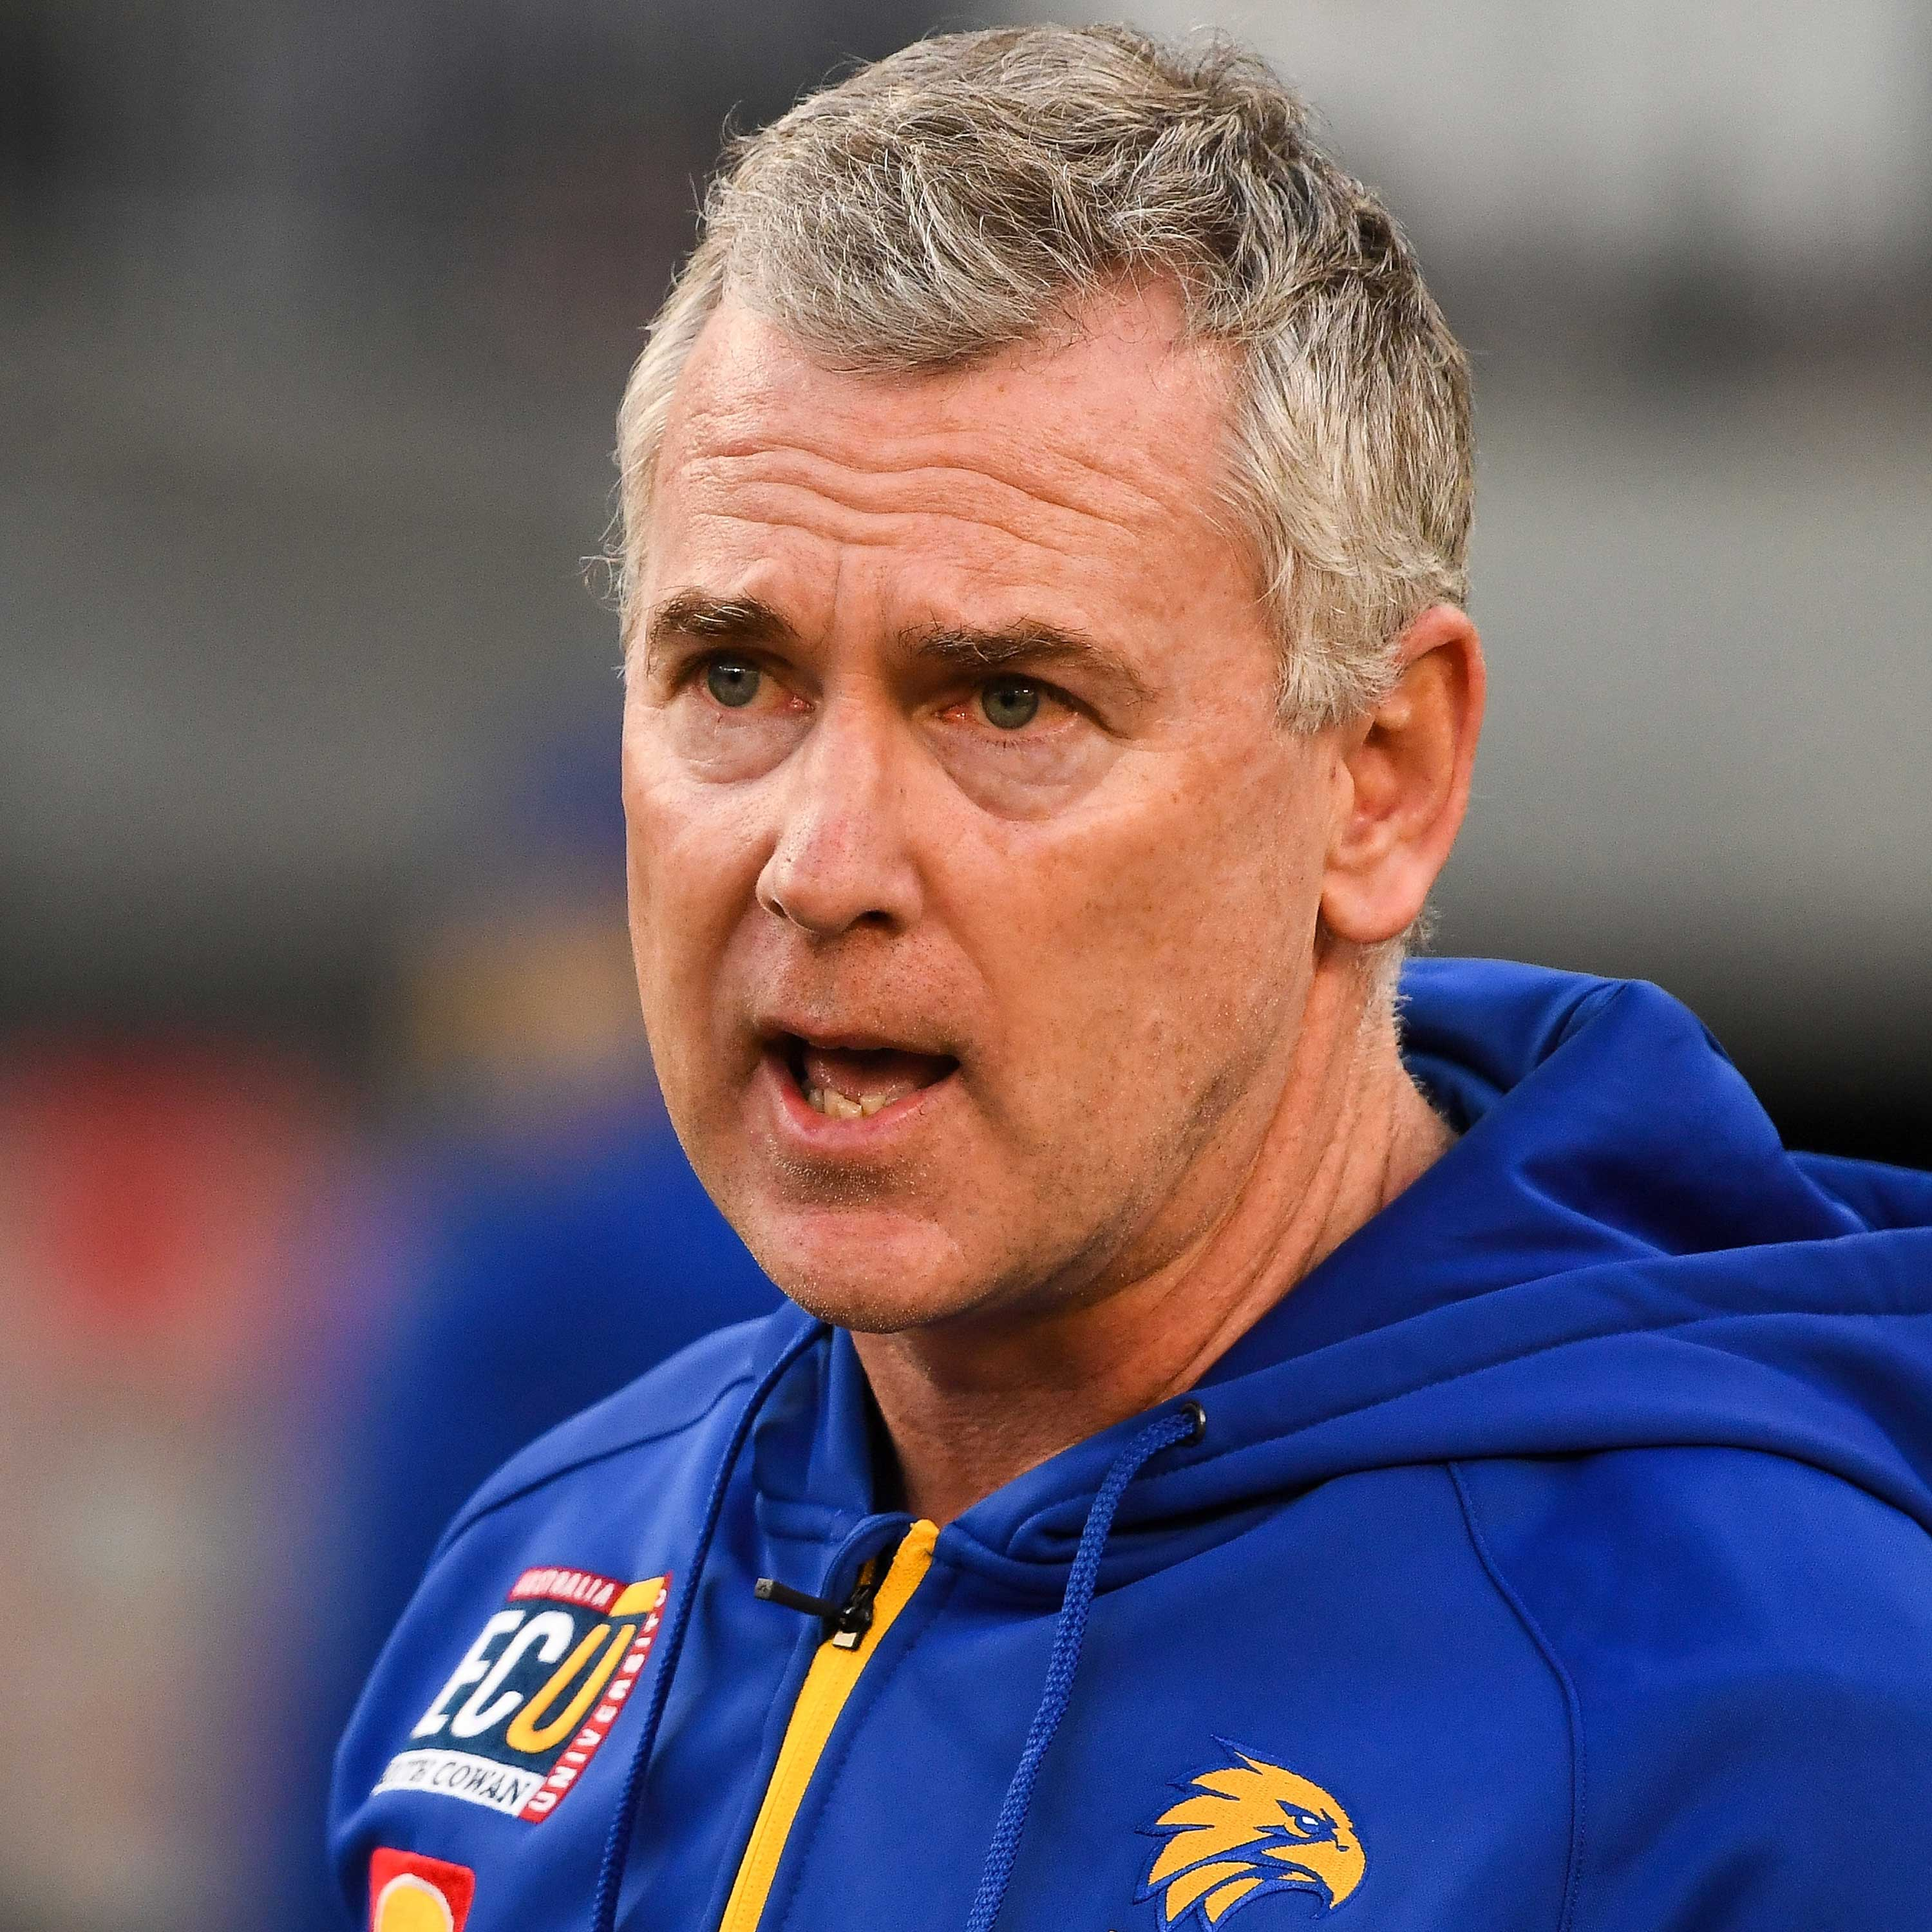 West Coast coach hits back at 'insulting' COVID-19 claims